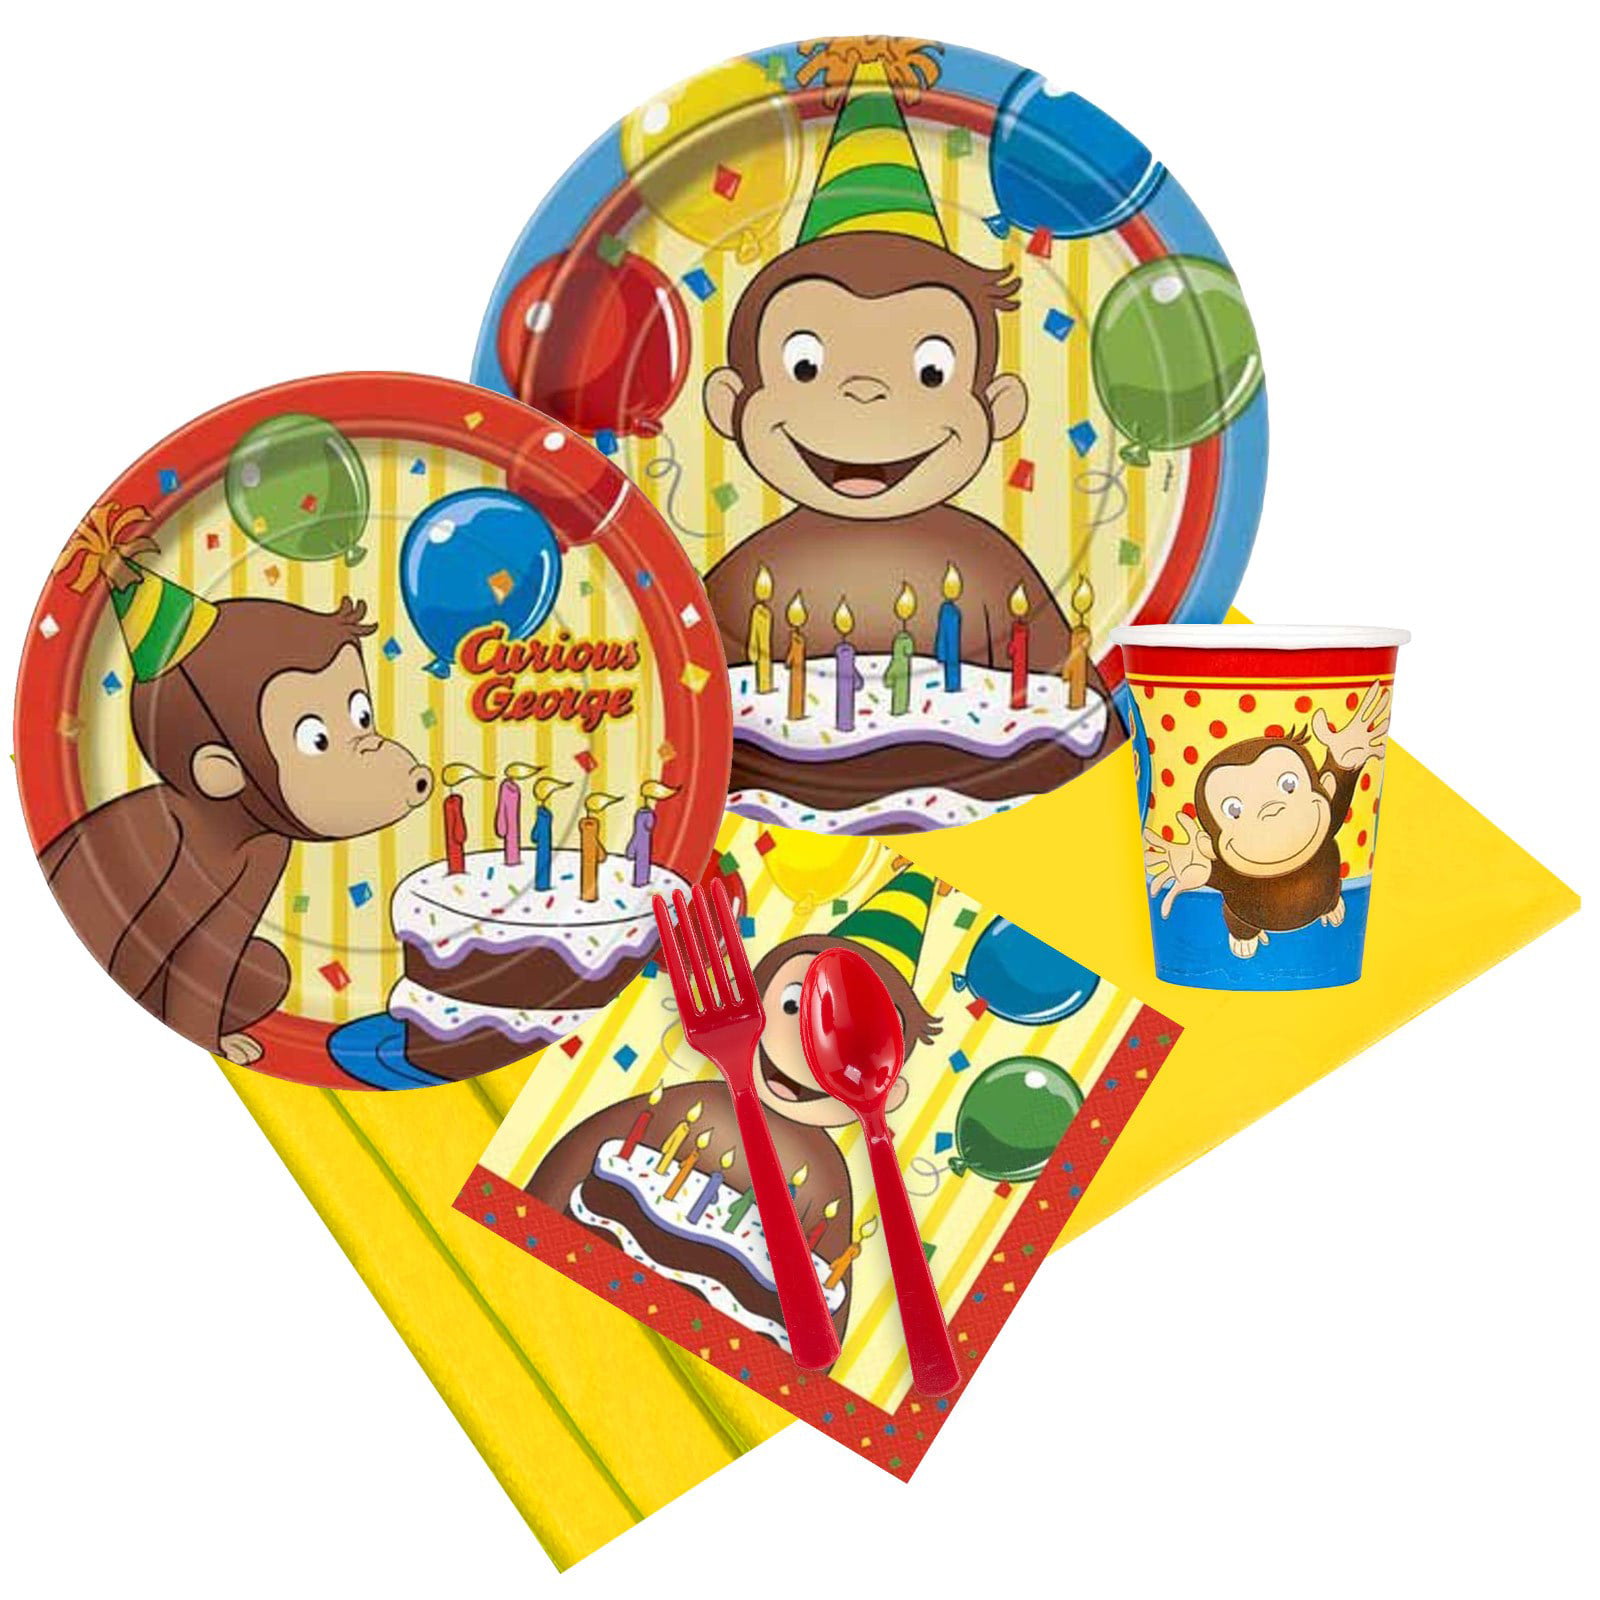 84 x 54 Curious George Plastic Tablecloth